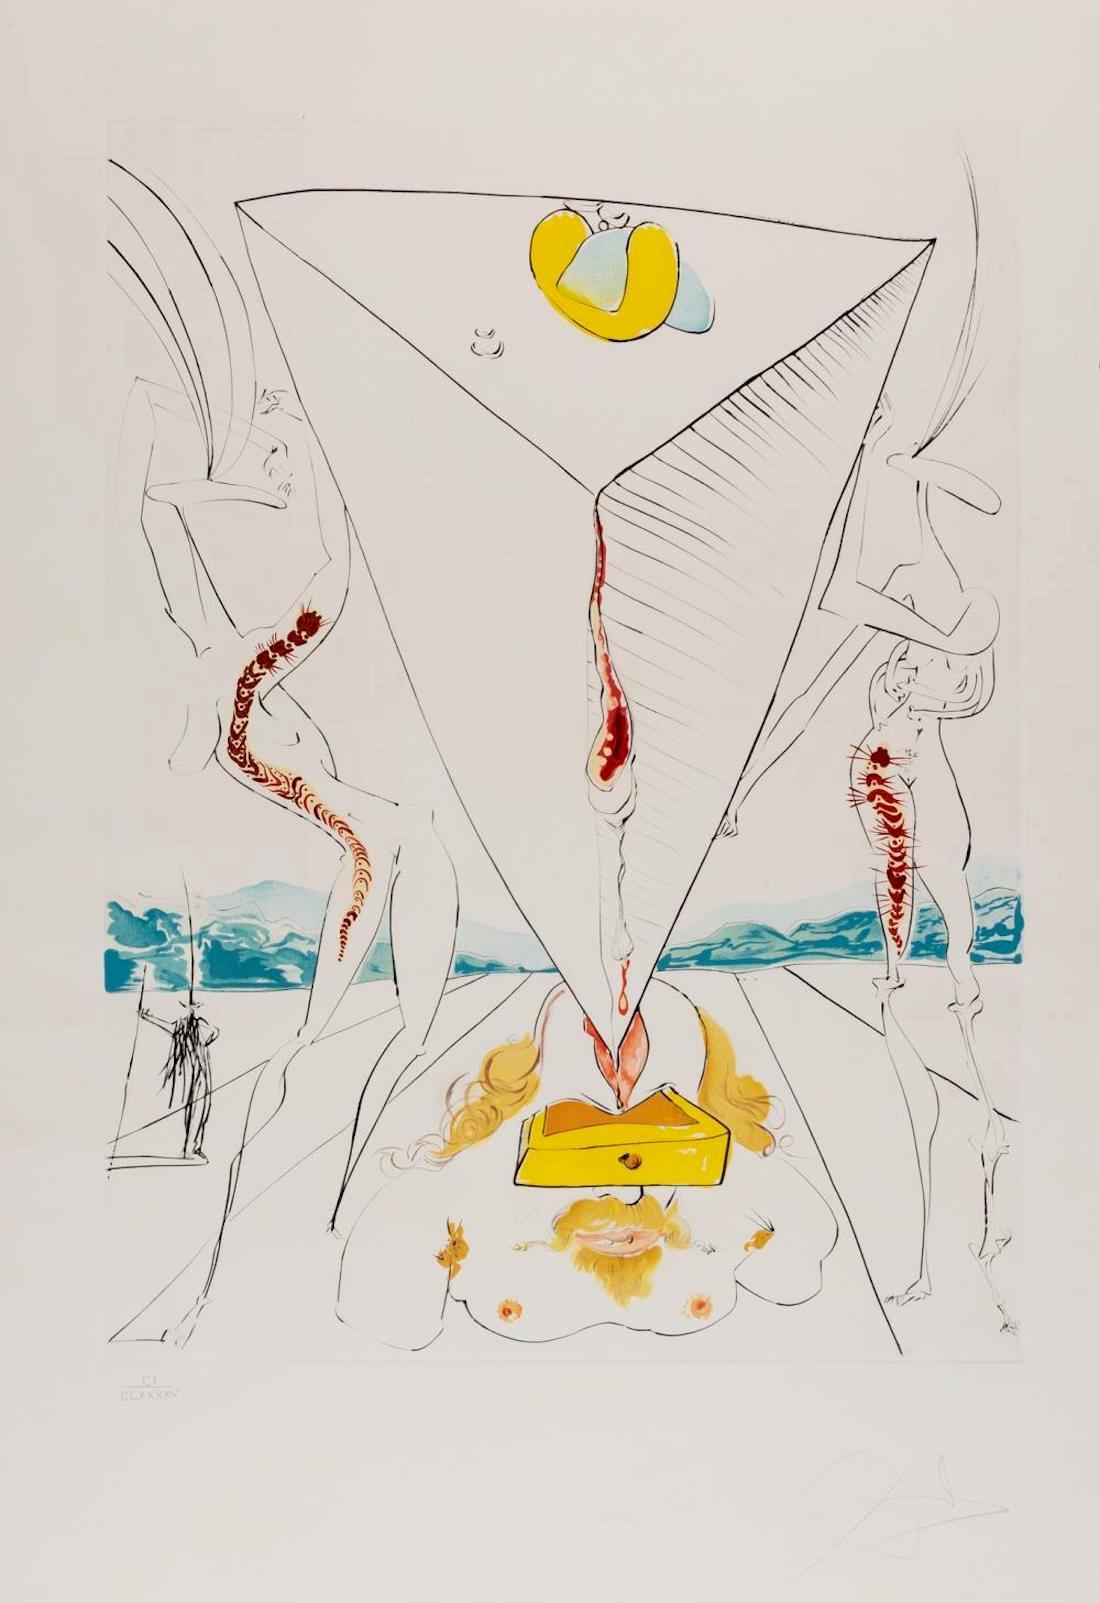 Conquest of Cosmos 1 Suite - Print by Salvador Dalí